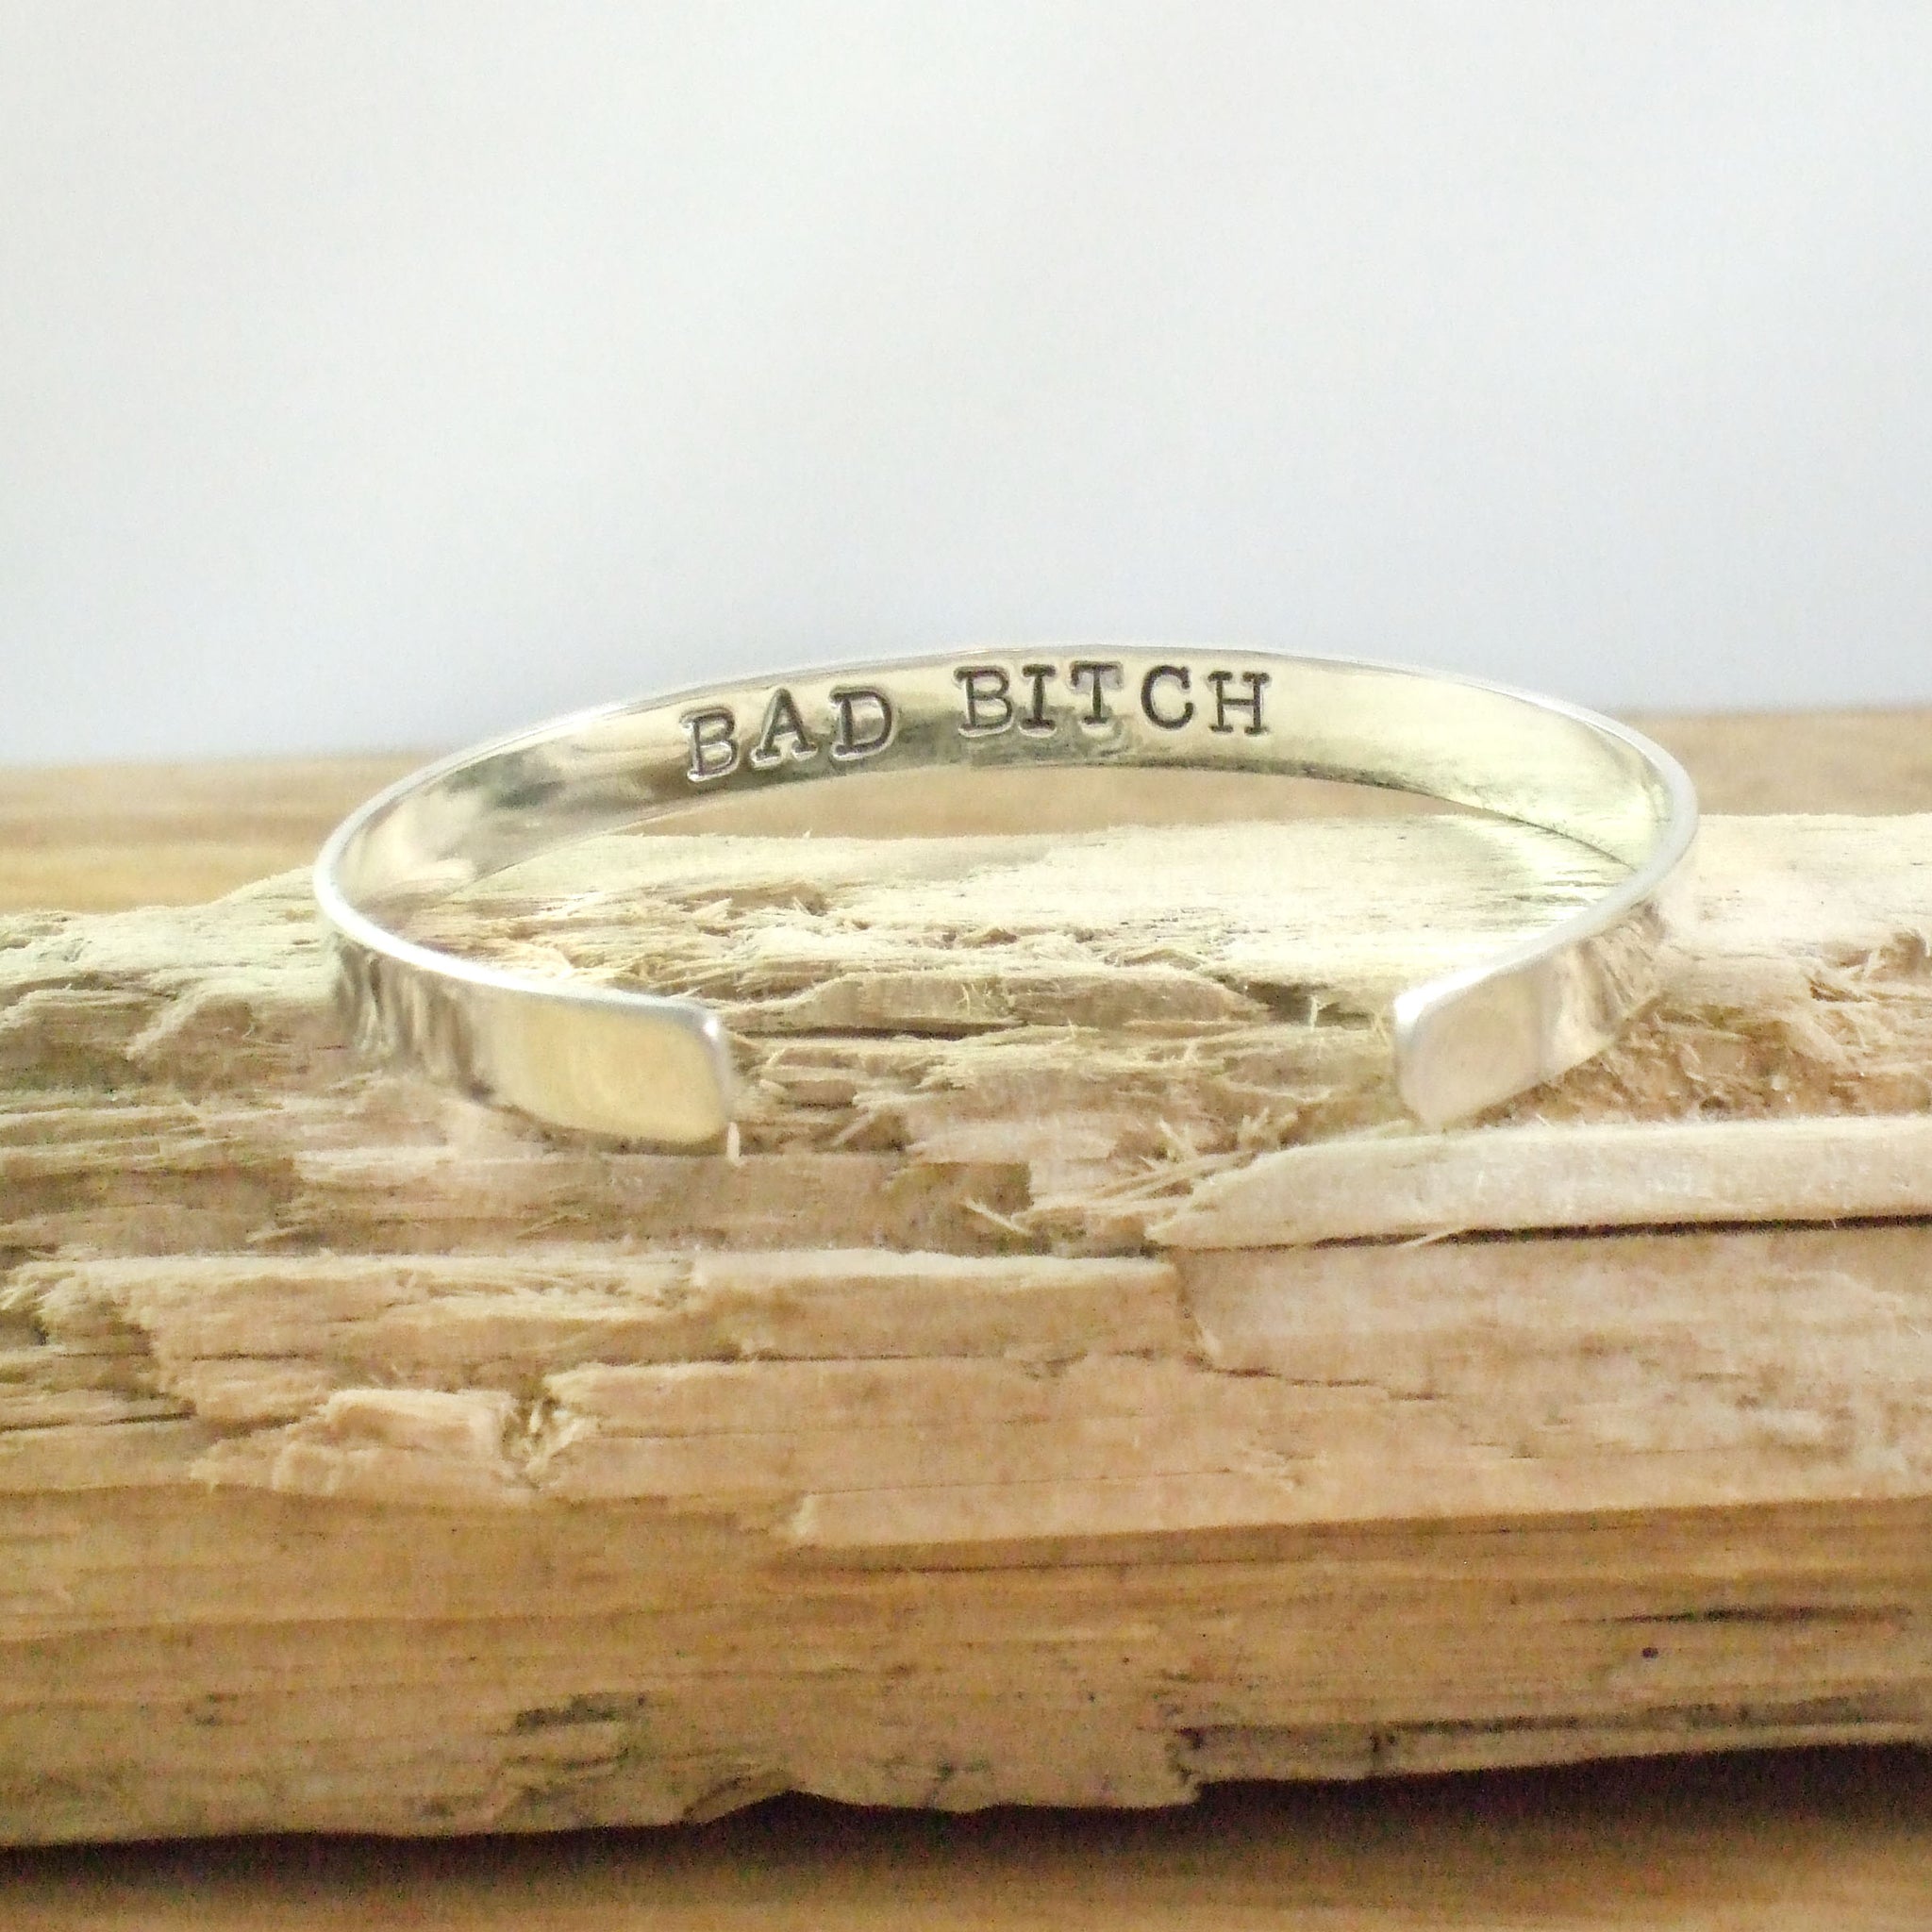 BAD BITCH CUFF BRACELET IN RECYCLED STERLING SILVER